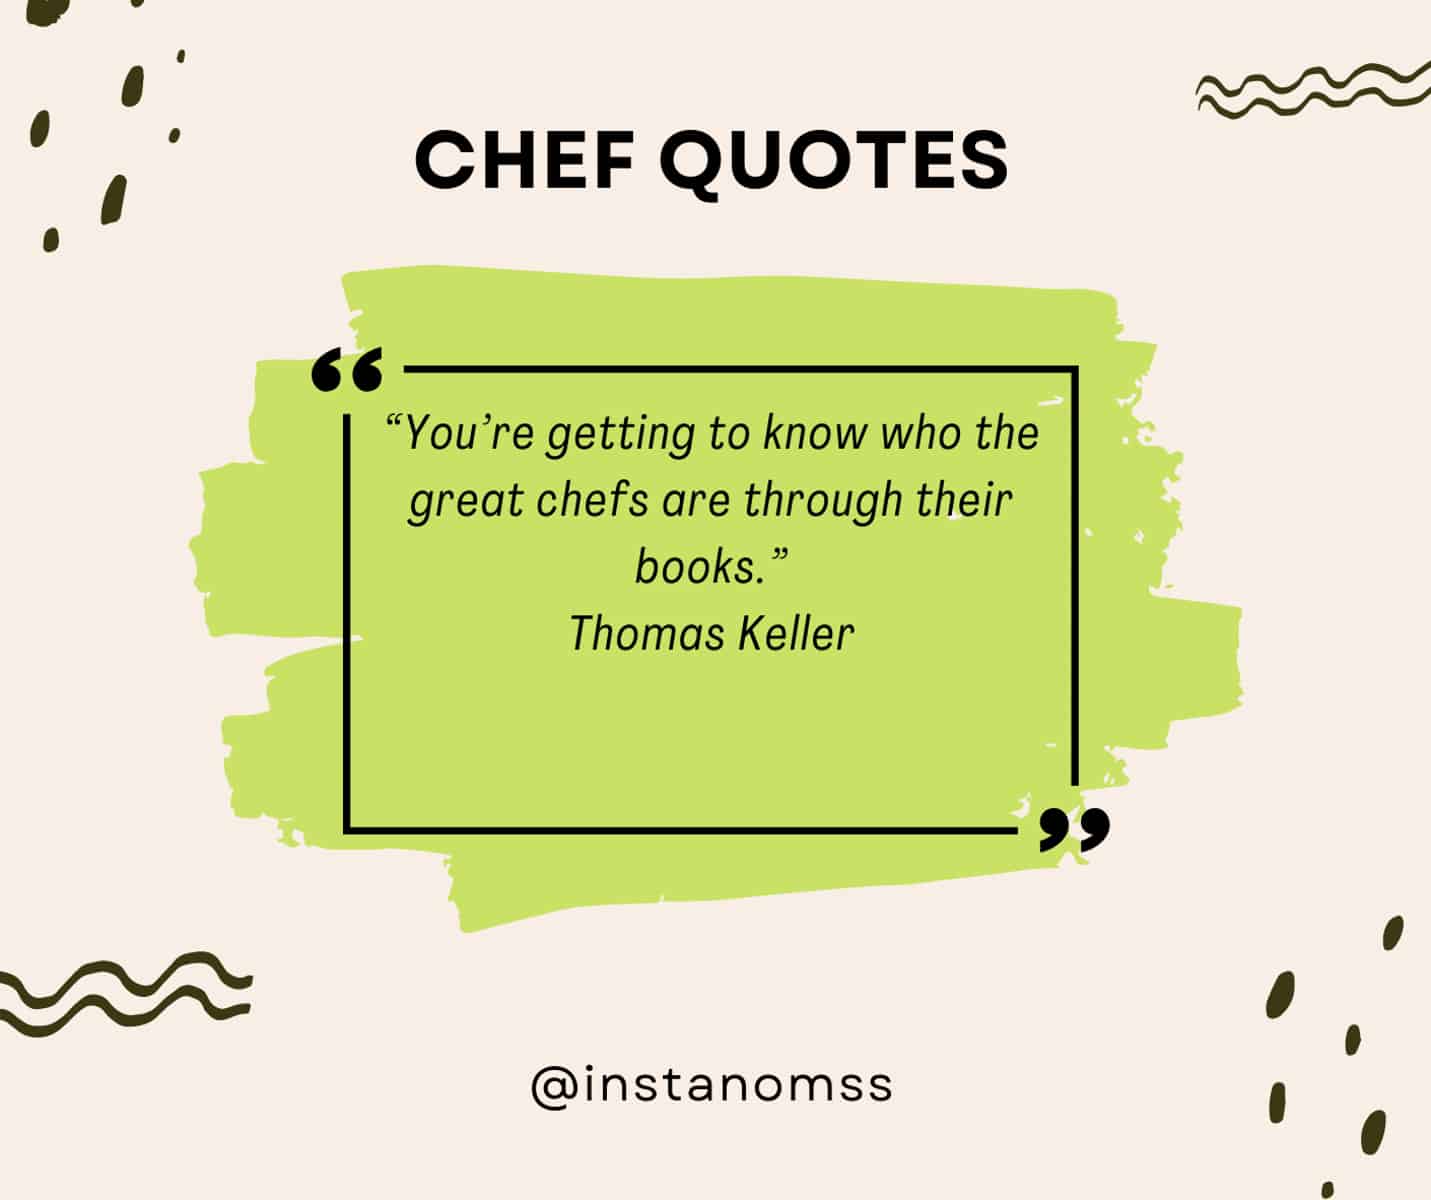 “You’re getting to know who the great chefs are through their books.” Thomas Keller